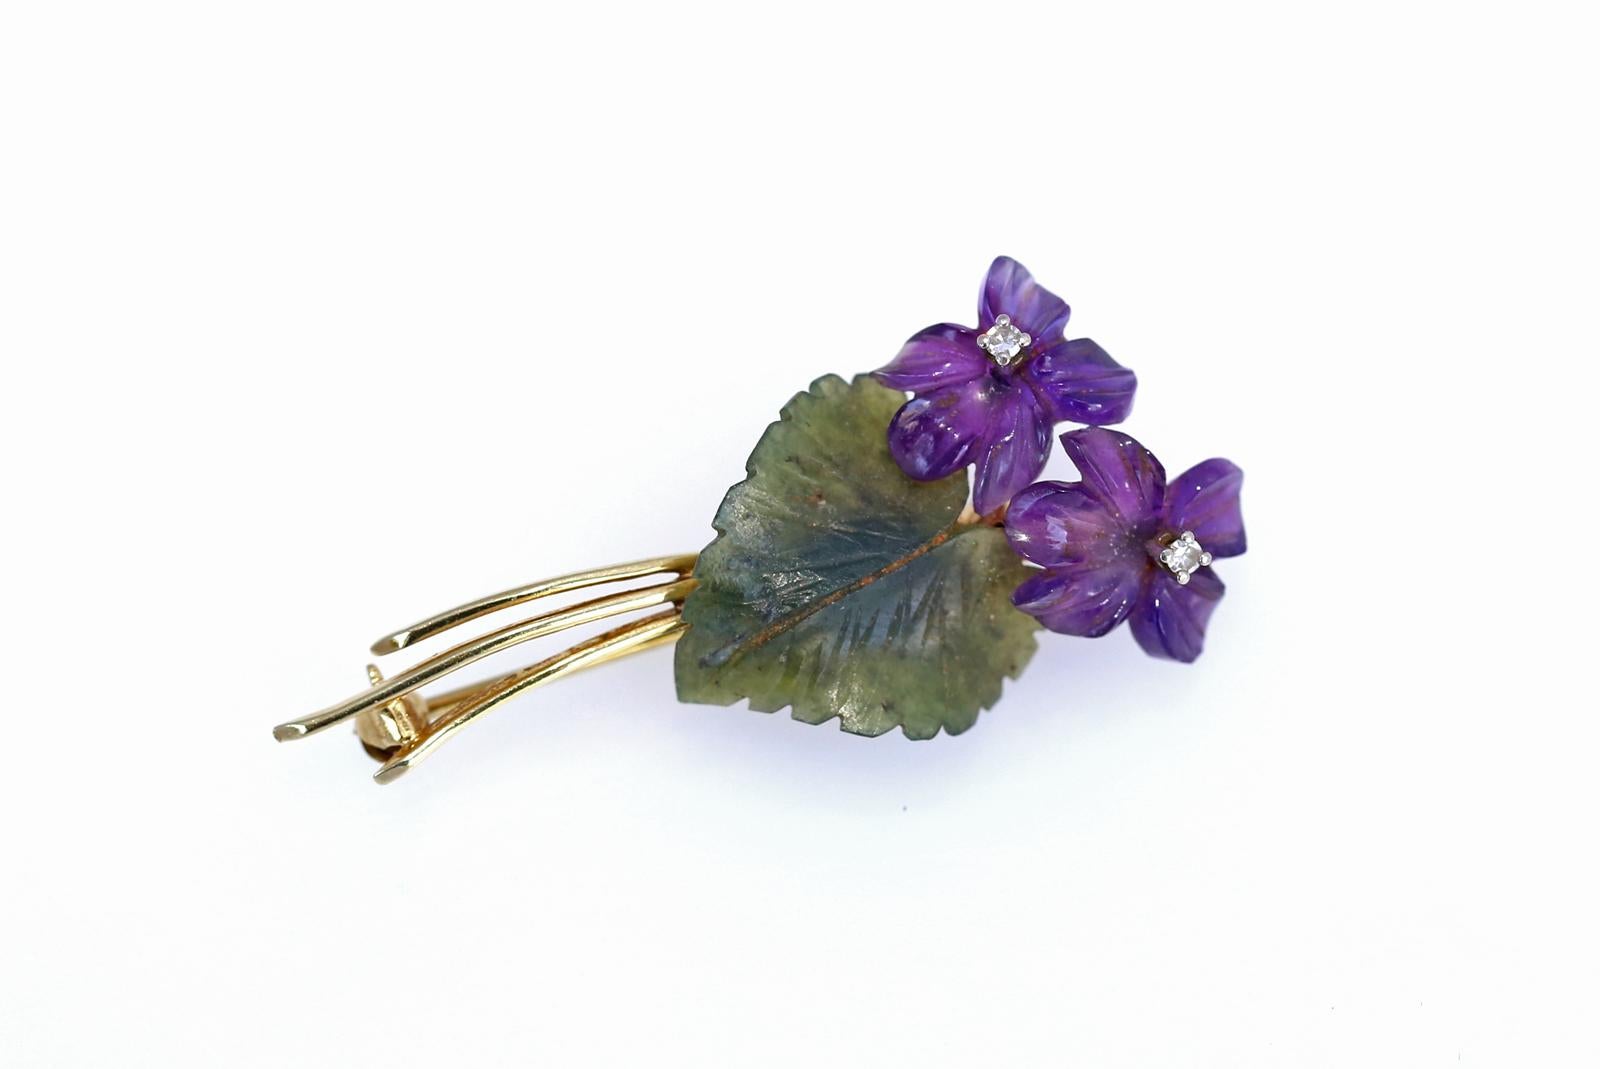 Violet flowers brooch comprising: Amethyst, Jade (jadeite) and Diamonds.
Yellow gold 585/000 (14K)
A pair of engraved amethyst flowers with a green leaf made of jadeite. In the centre of the flower, there are two fine white Diamonds. Handcrafted by